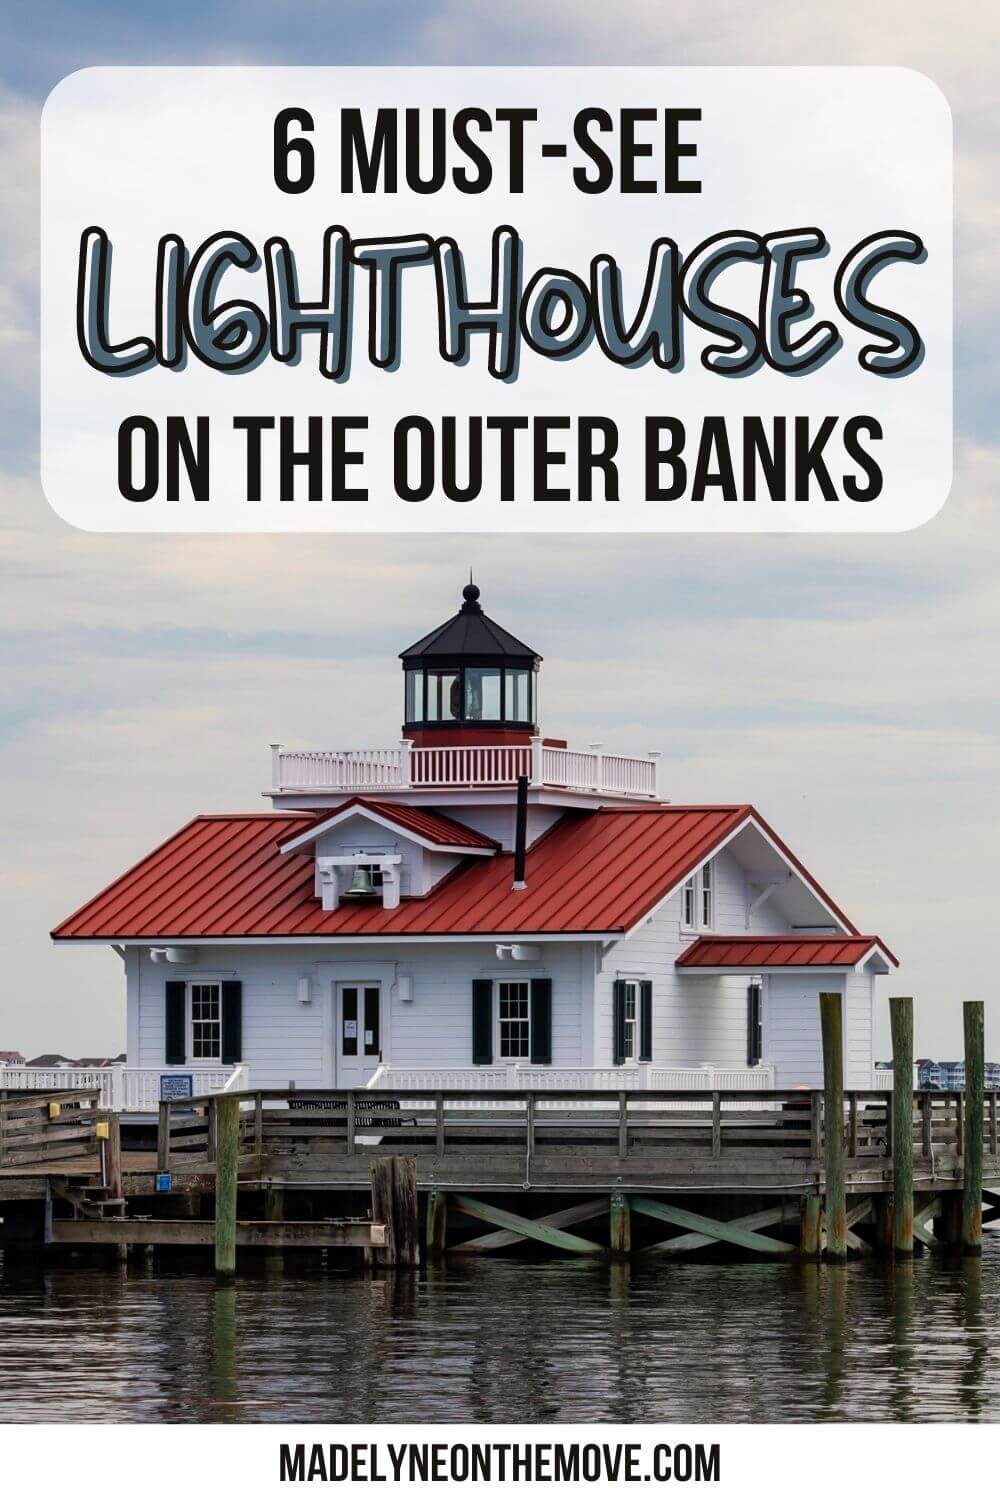 Lighthouses in Outer Banks graphic